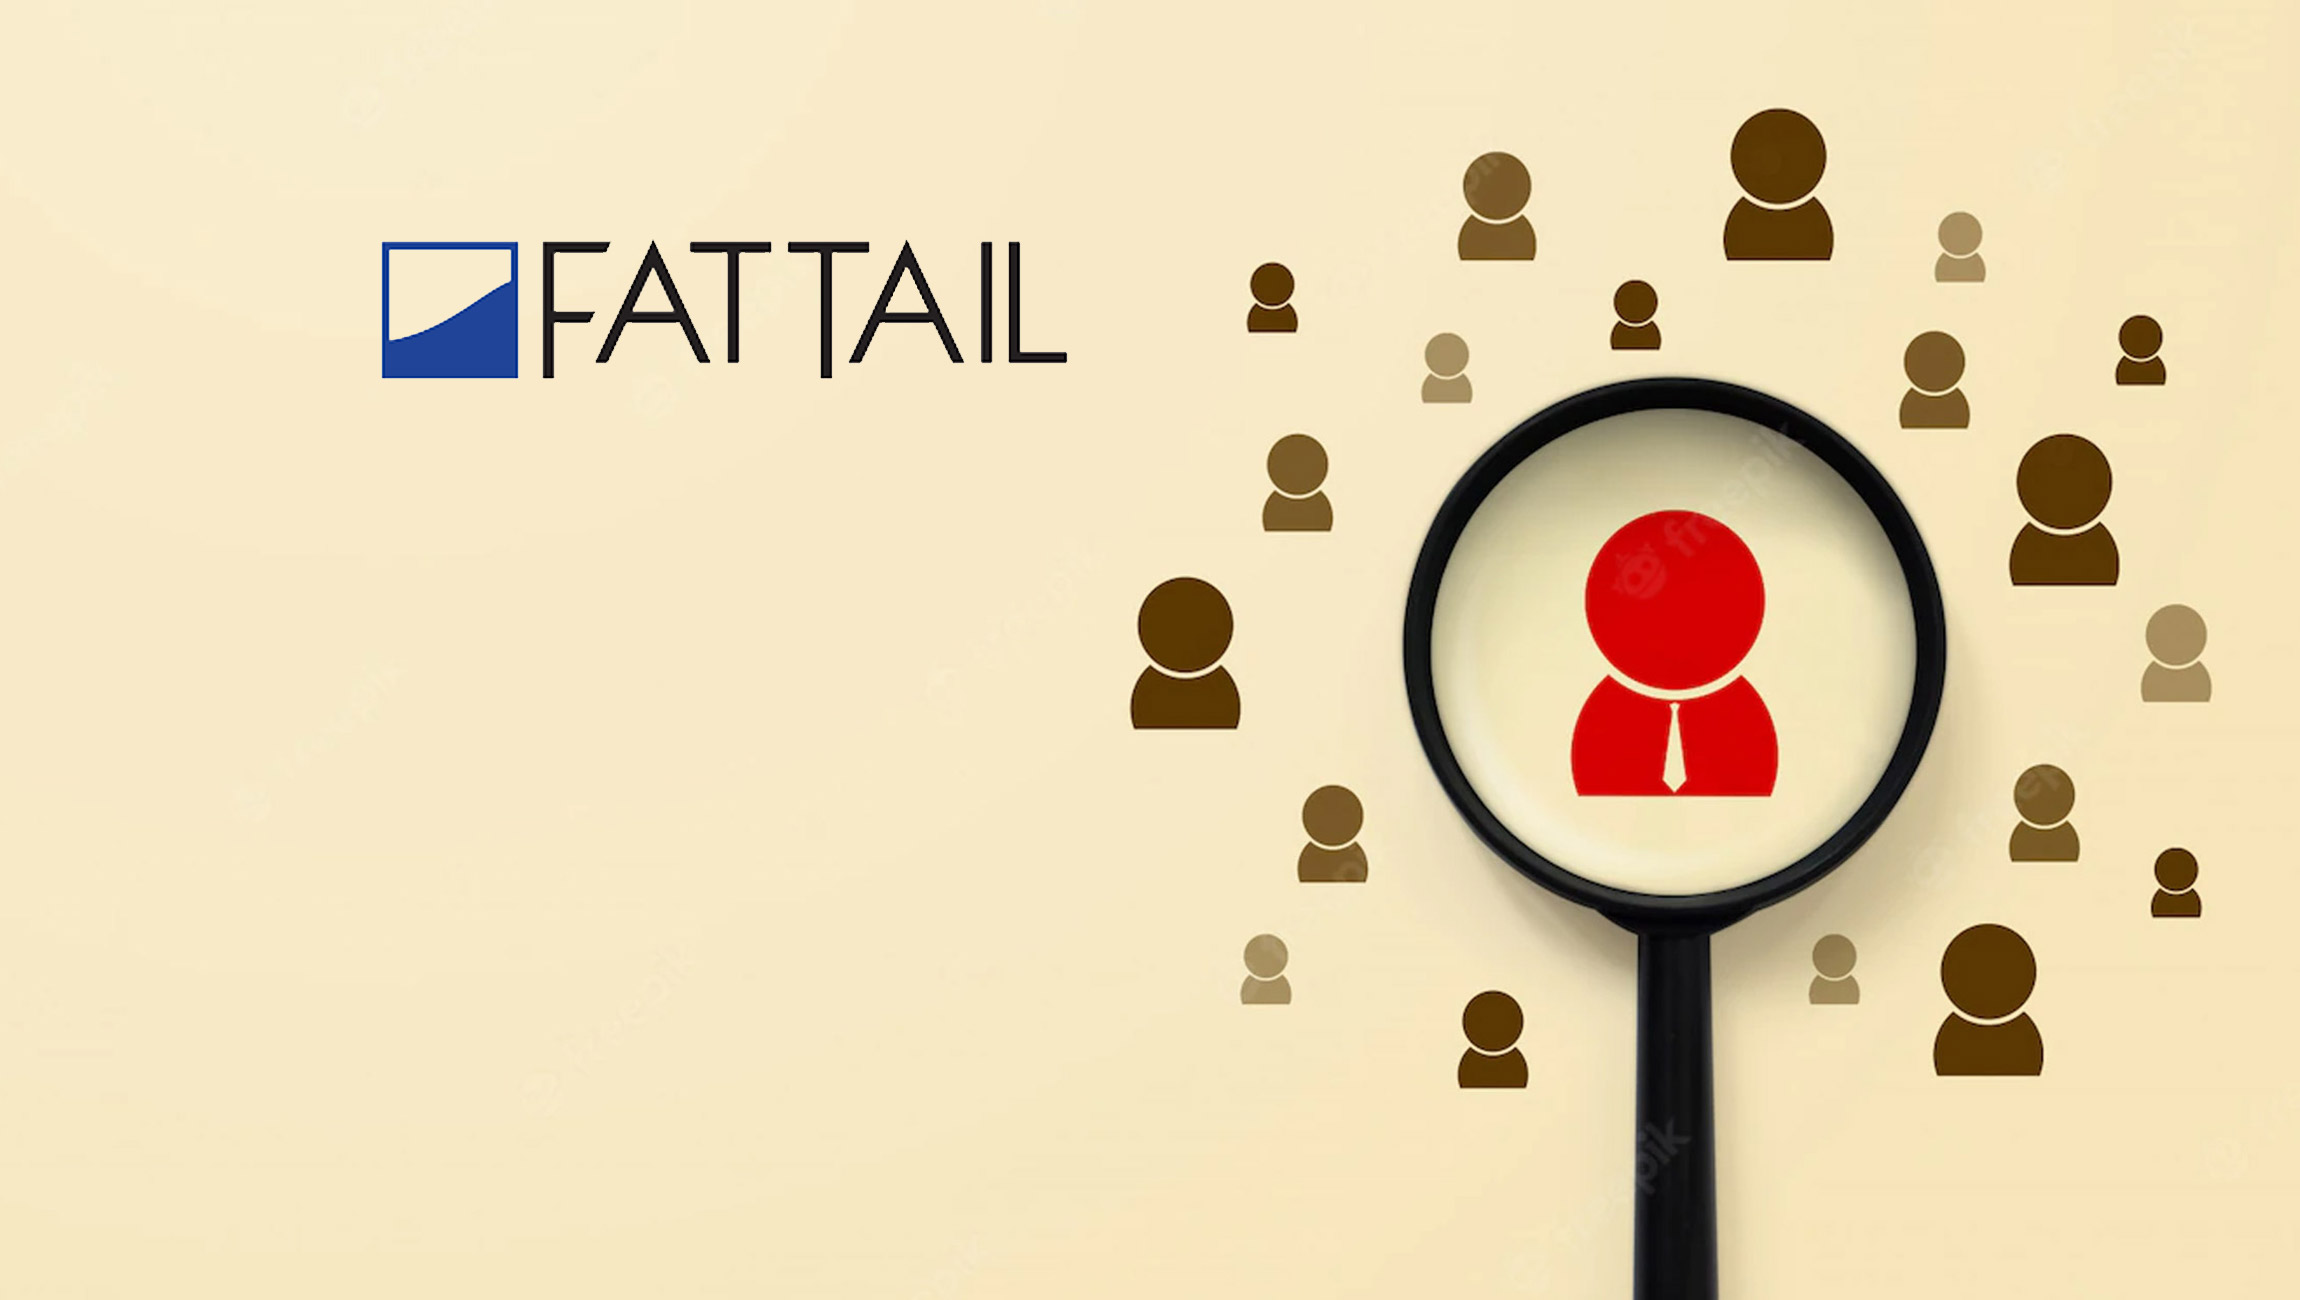 FatTail-Appoints-Laura-Boodram-Chief-Revenue-Officer-to-Bolster-Customer-Experience-as-Adtech-Firm-Scales (1)